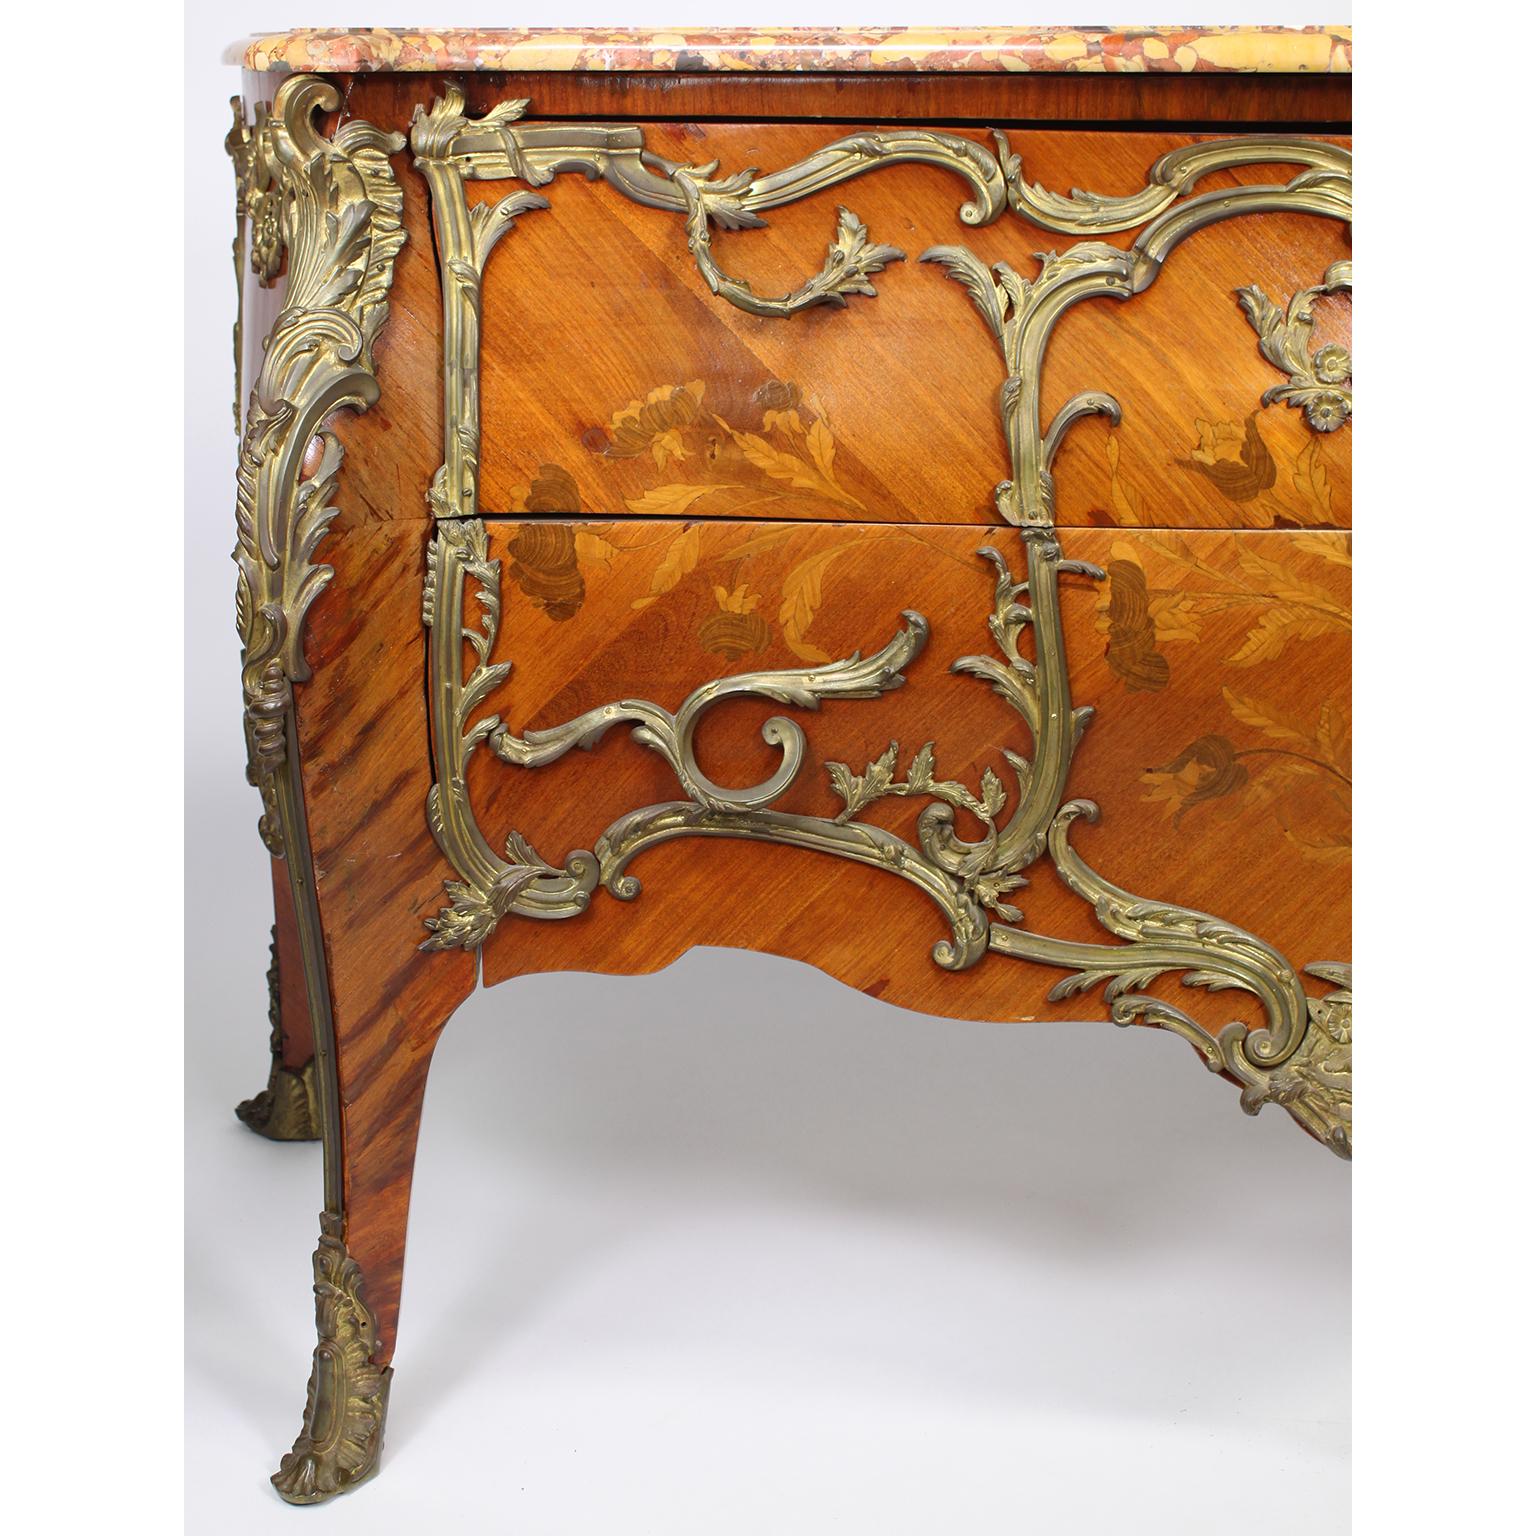 Early 20th Century French 19th/20th Century Louis XV Style Gilt-Bronze Mounted Commode Marble Top For Sale